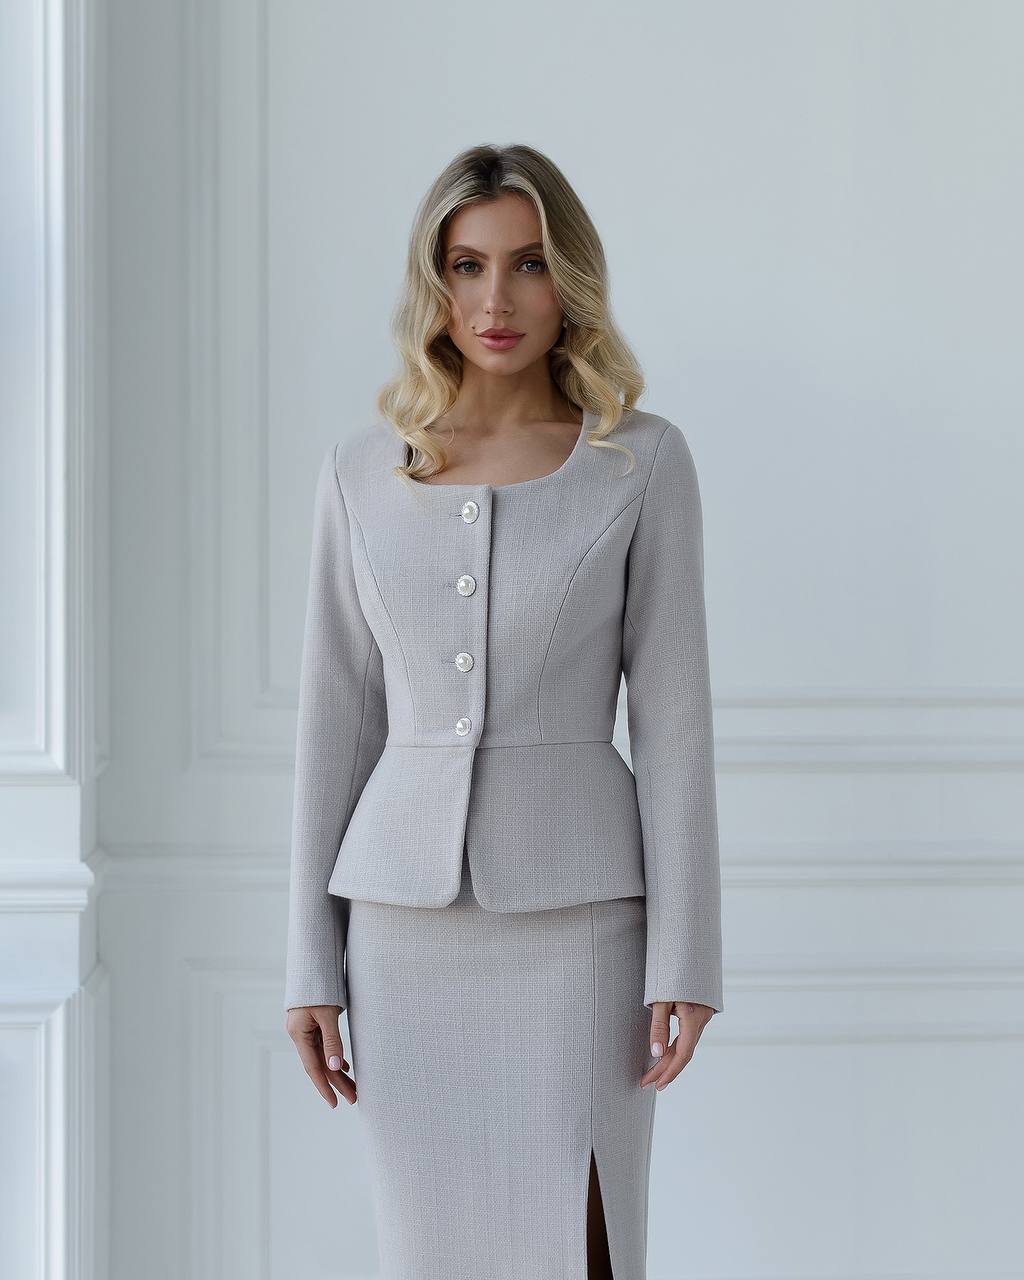 a woman in a grey dress and jacket